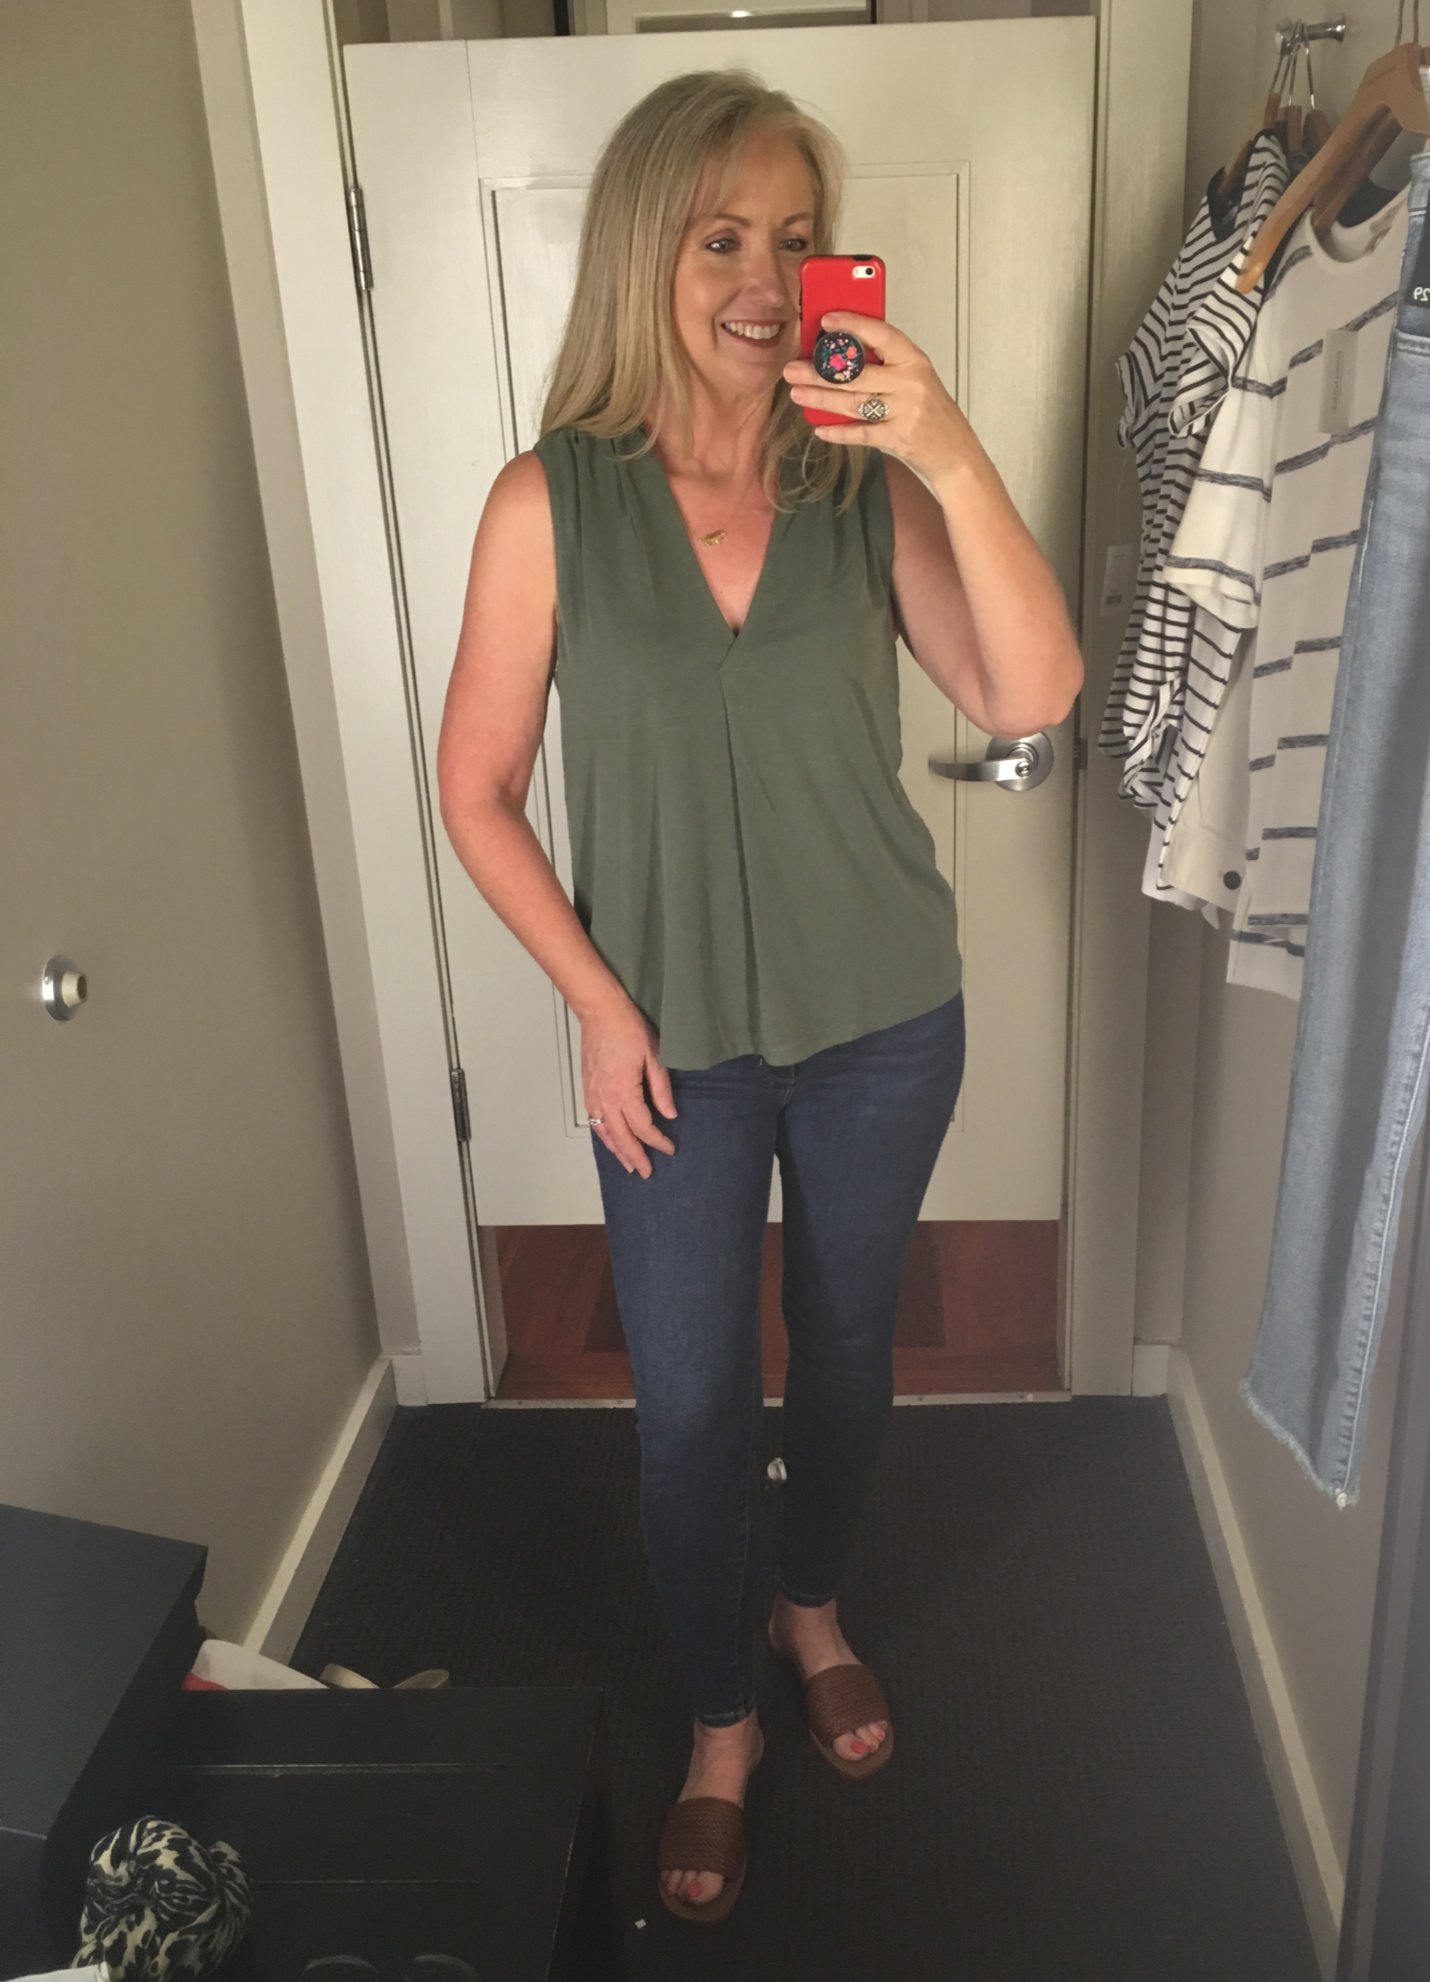 Banana Republic Casual Transitional Clothing - Dressed for My Day